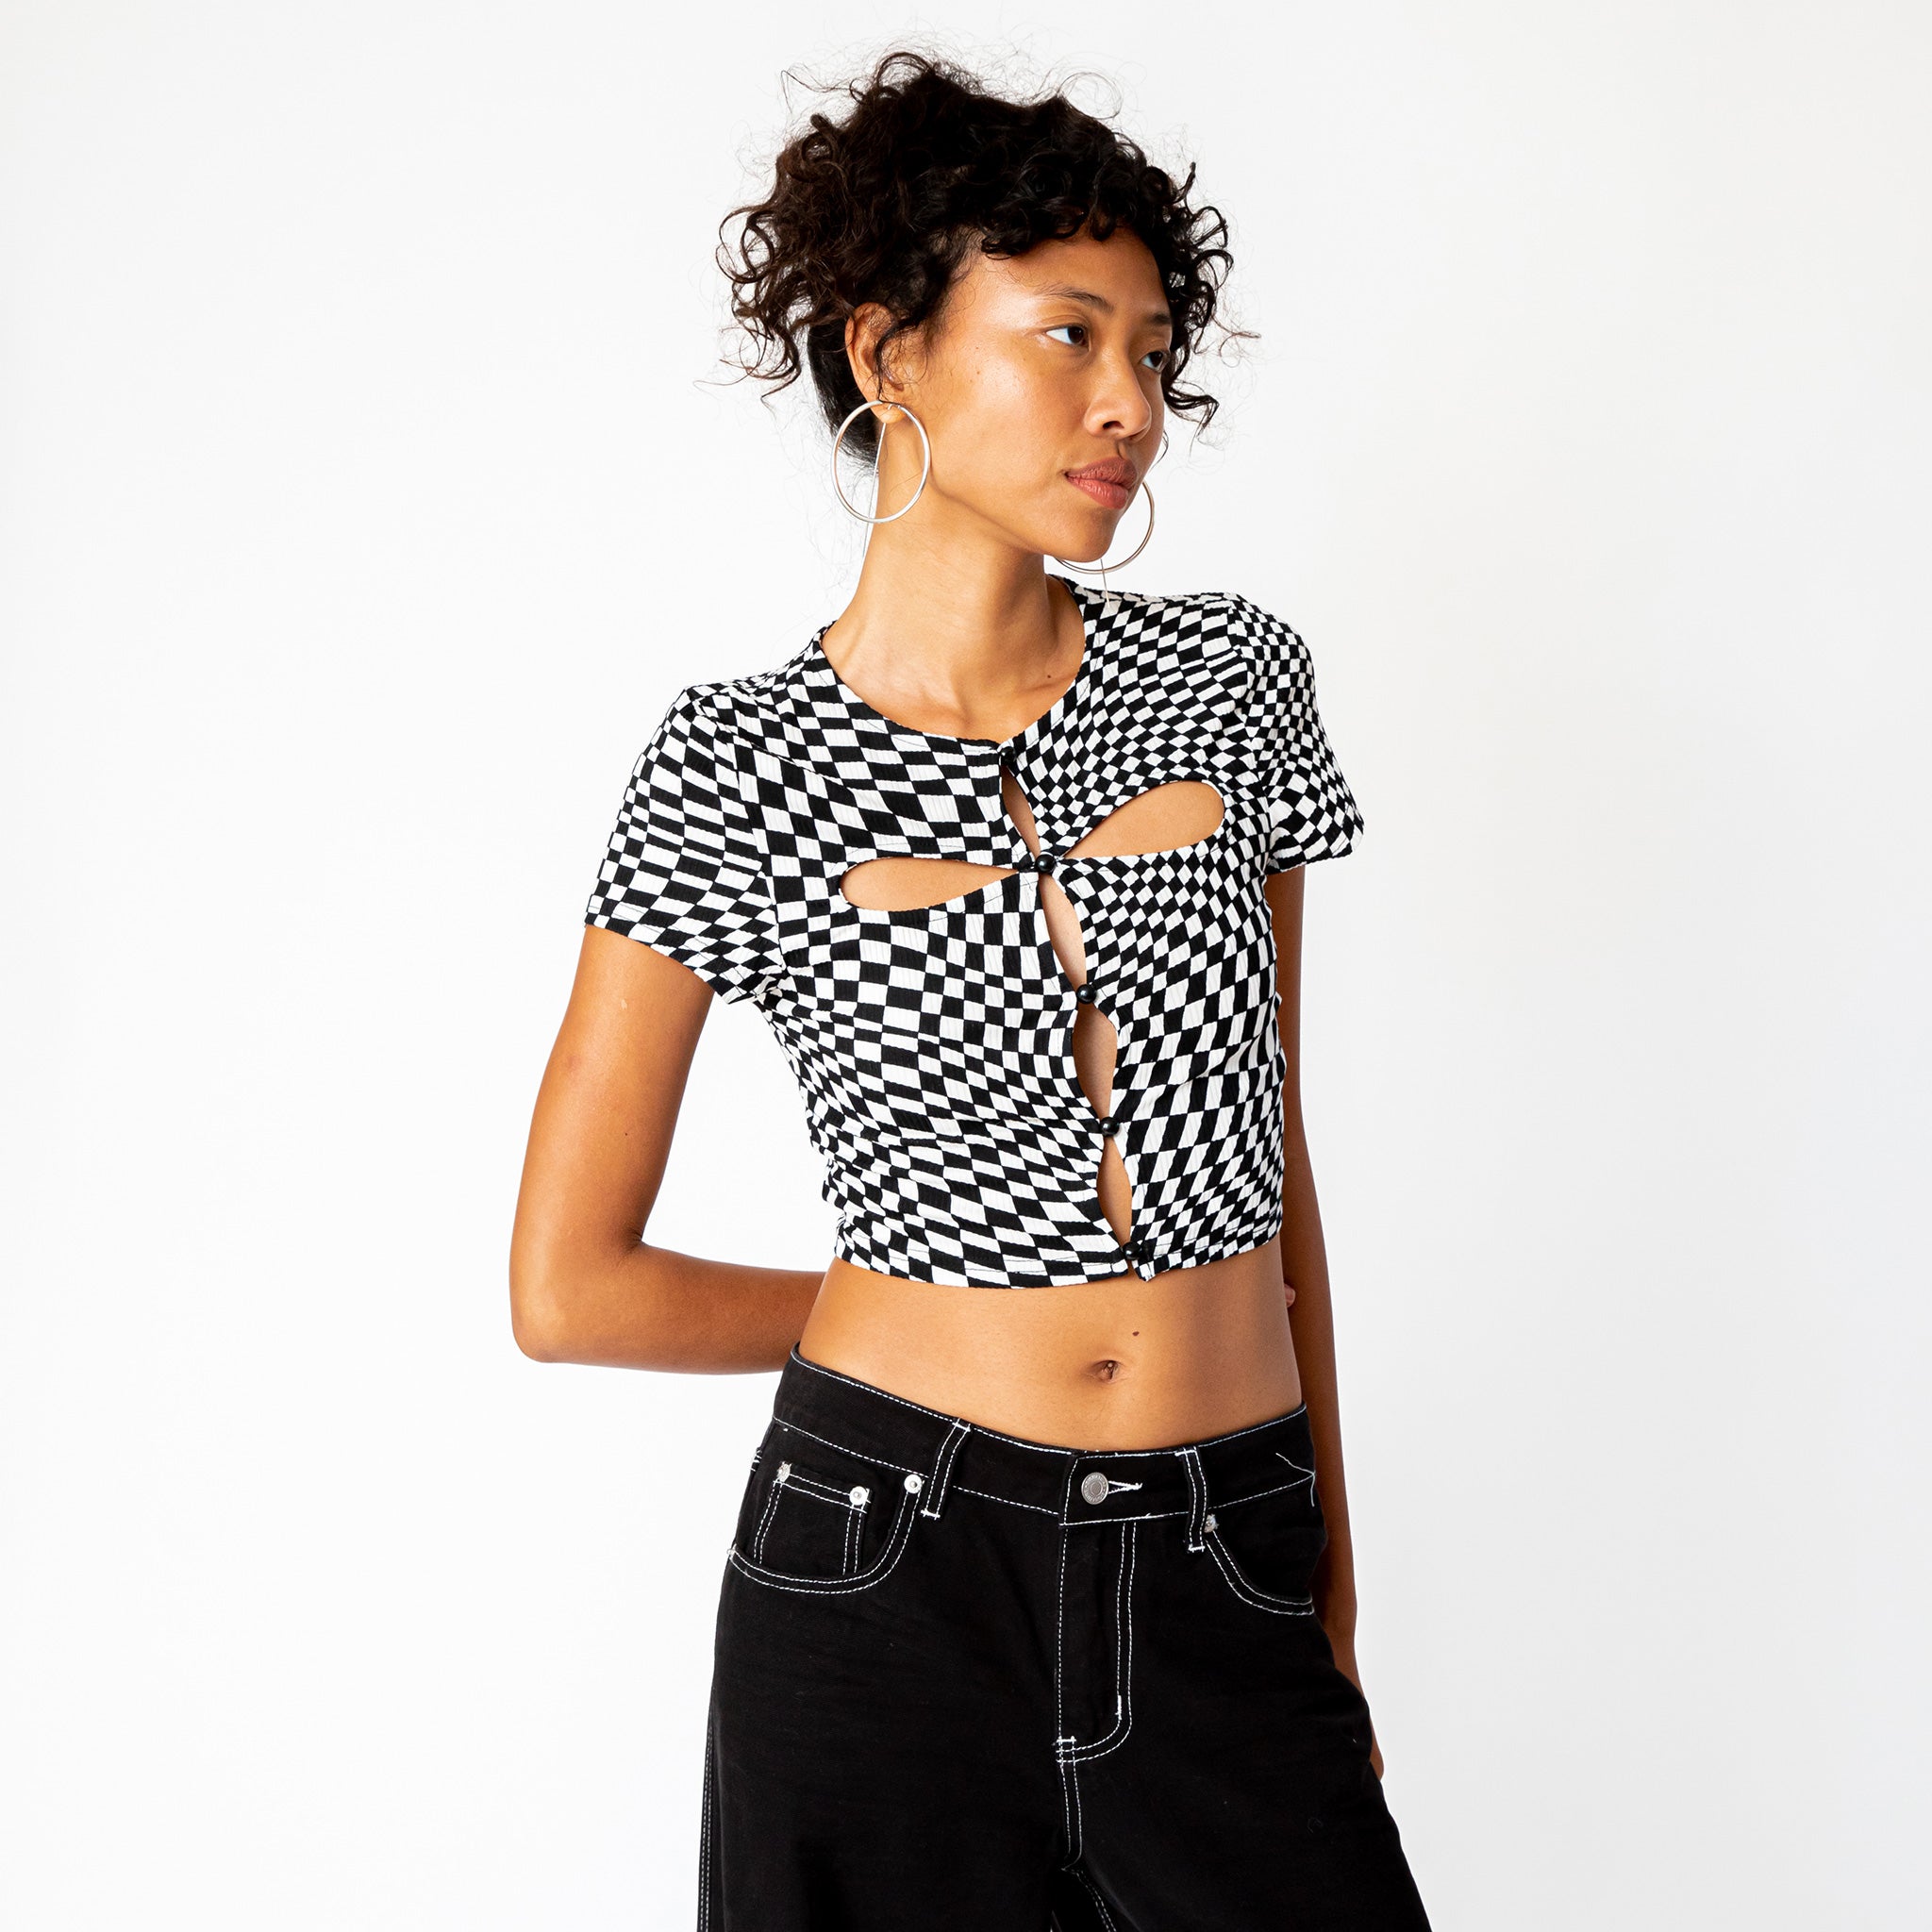 A model wears the black and white checkered cut out tee by Misc Etc, paired with black cargo pants while looking to the side.